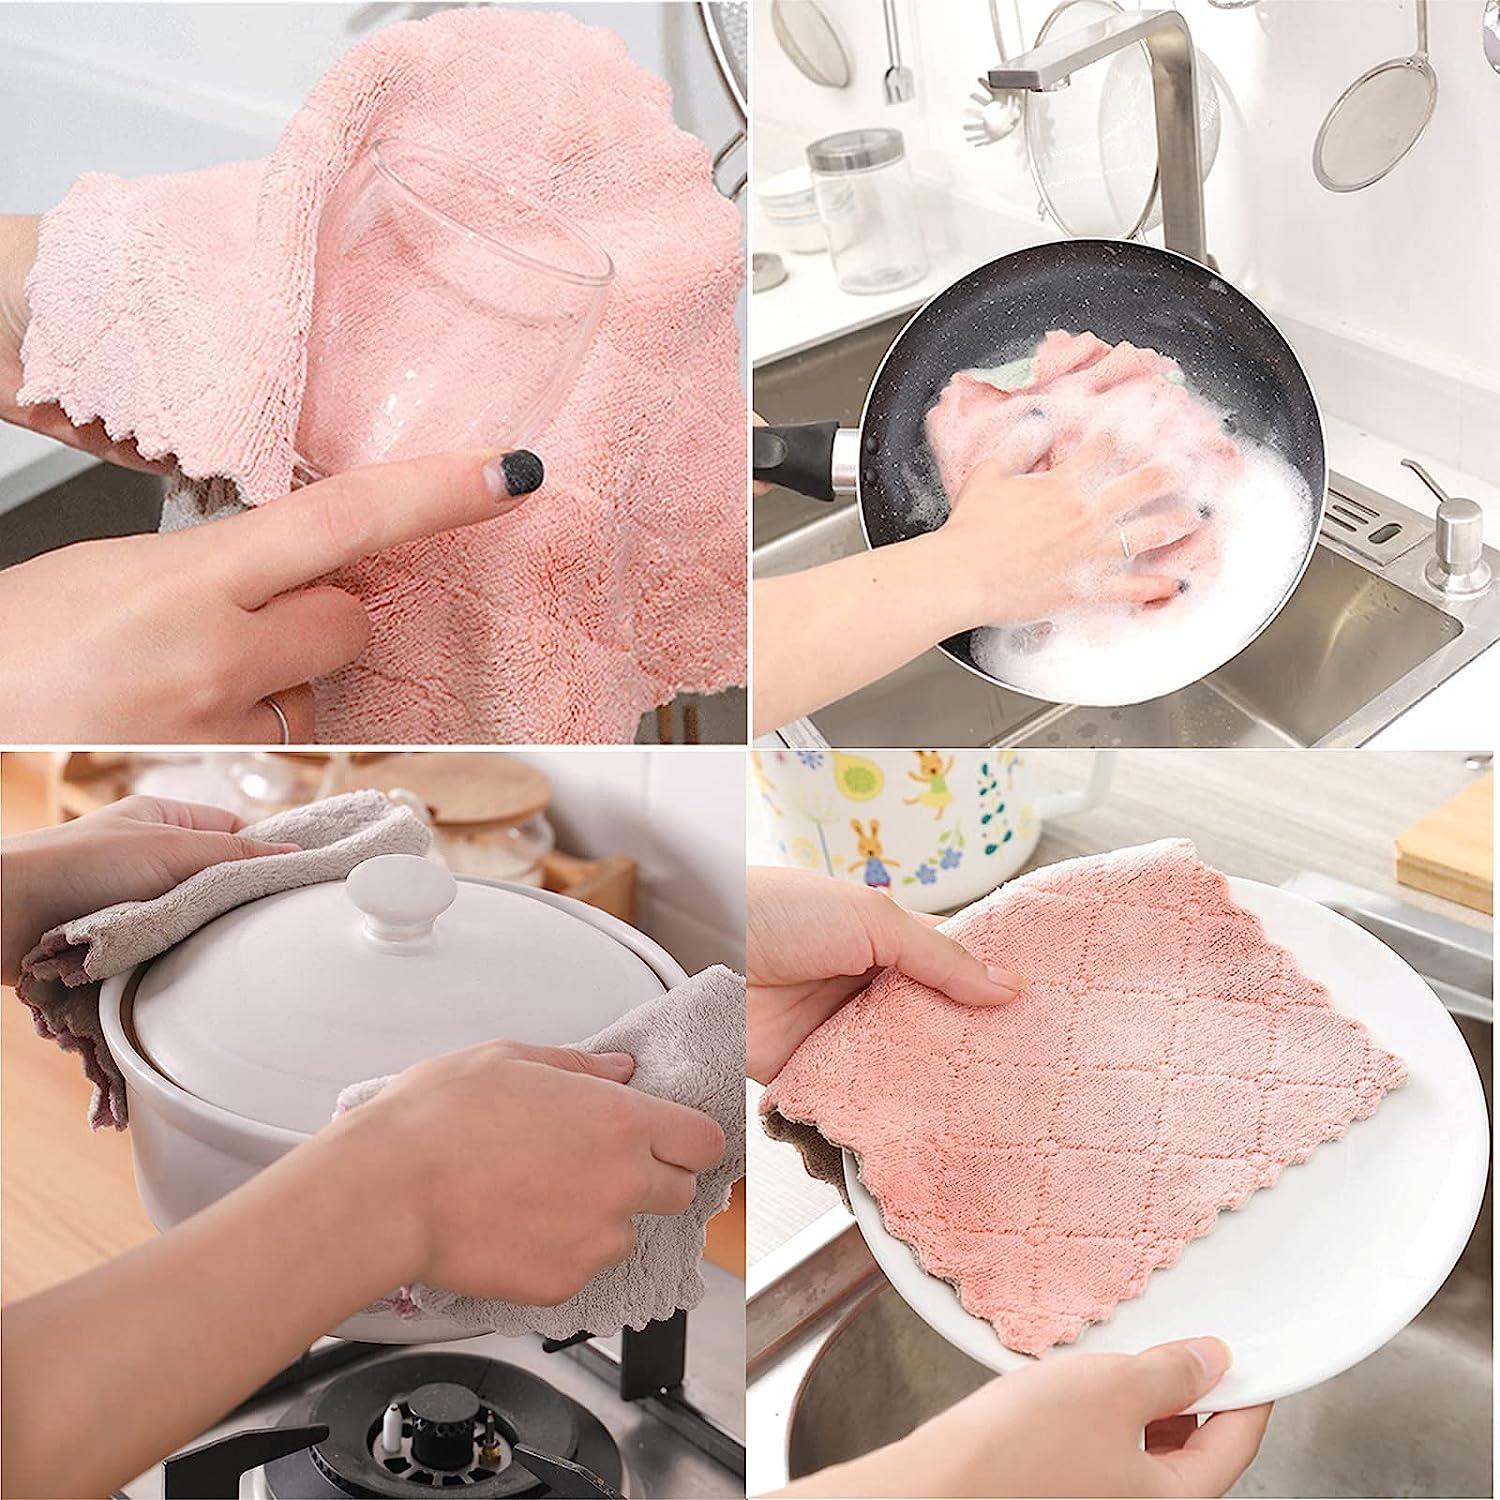 Dcastle! Cleaning Cloths Oil Free Dishwashing Towel Kitchen Cleaning Rag Microfiber  Towels Cleaning Micro Fiber Wipe Dish Towels B3 